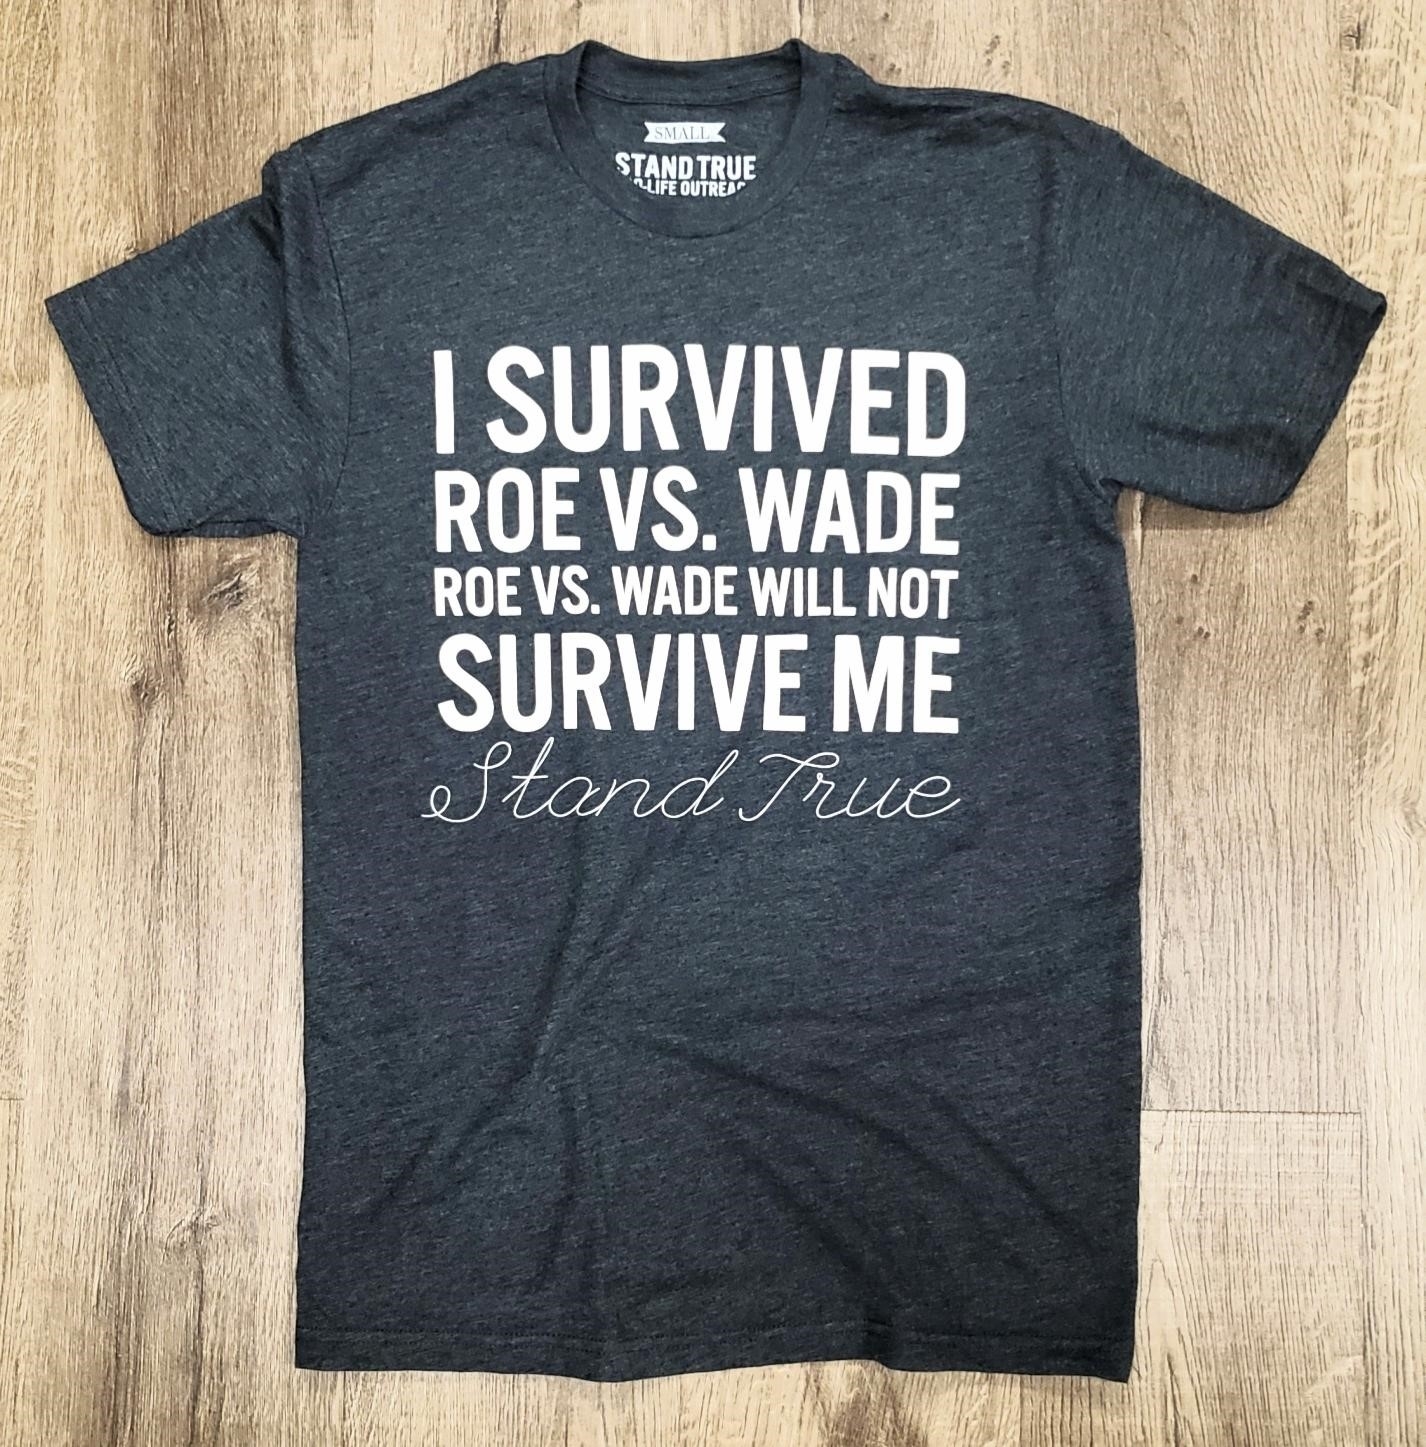 Priests for Life Online Store. I Survived Roe vs. Wade | Roe vs. Wade